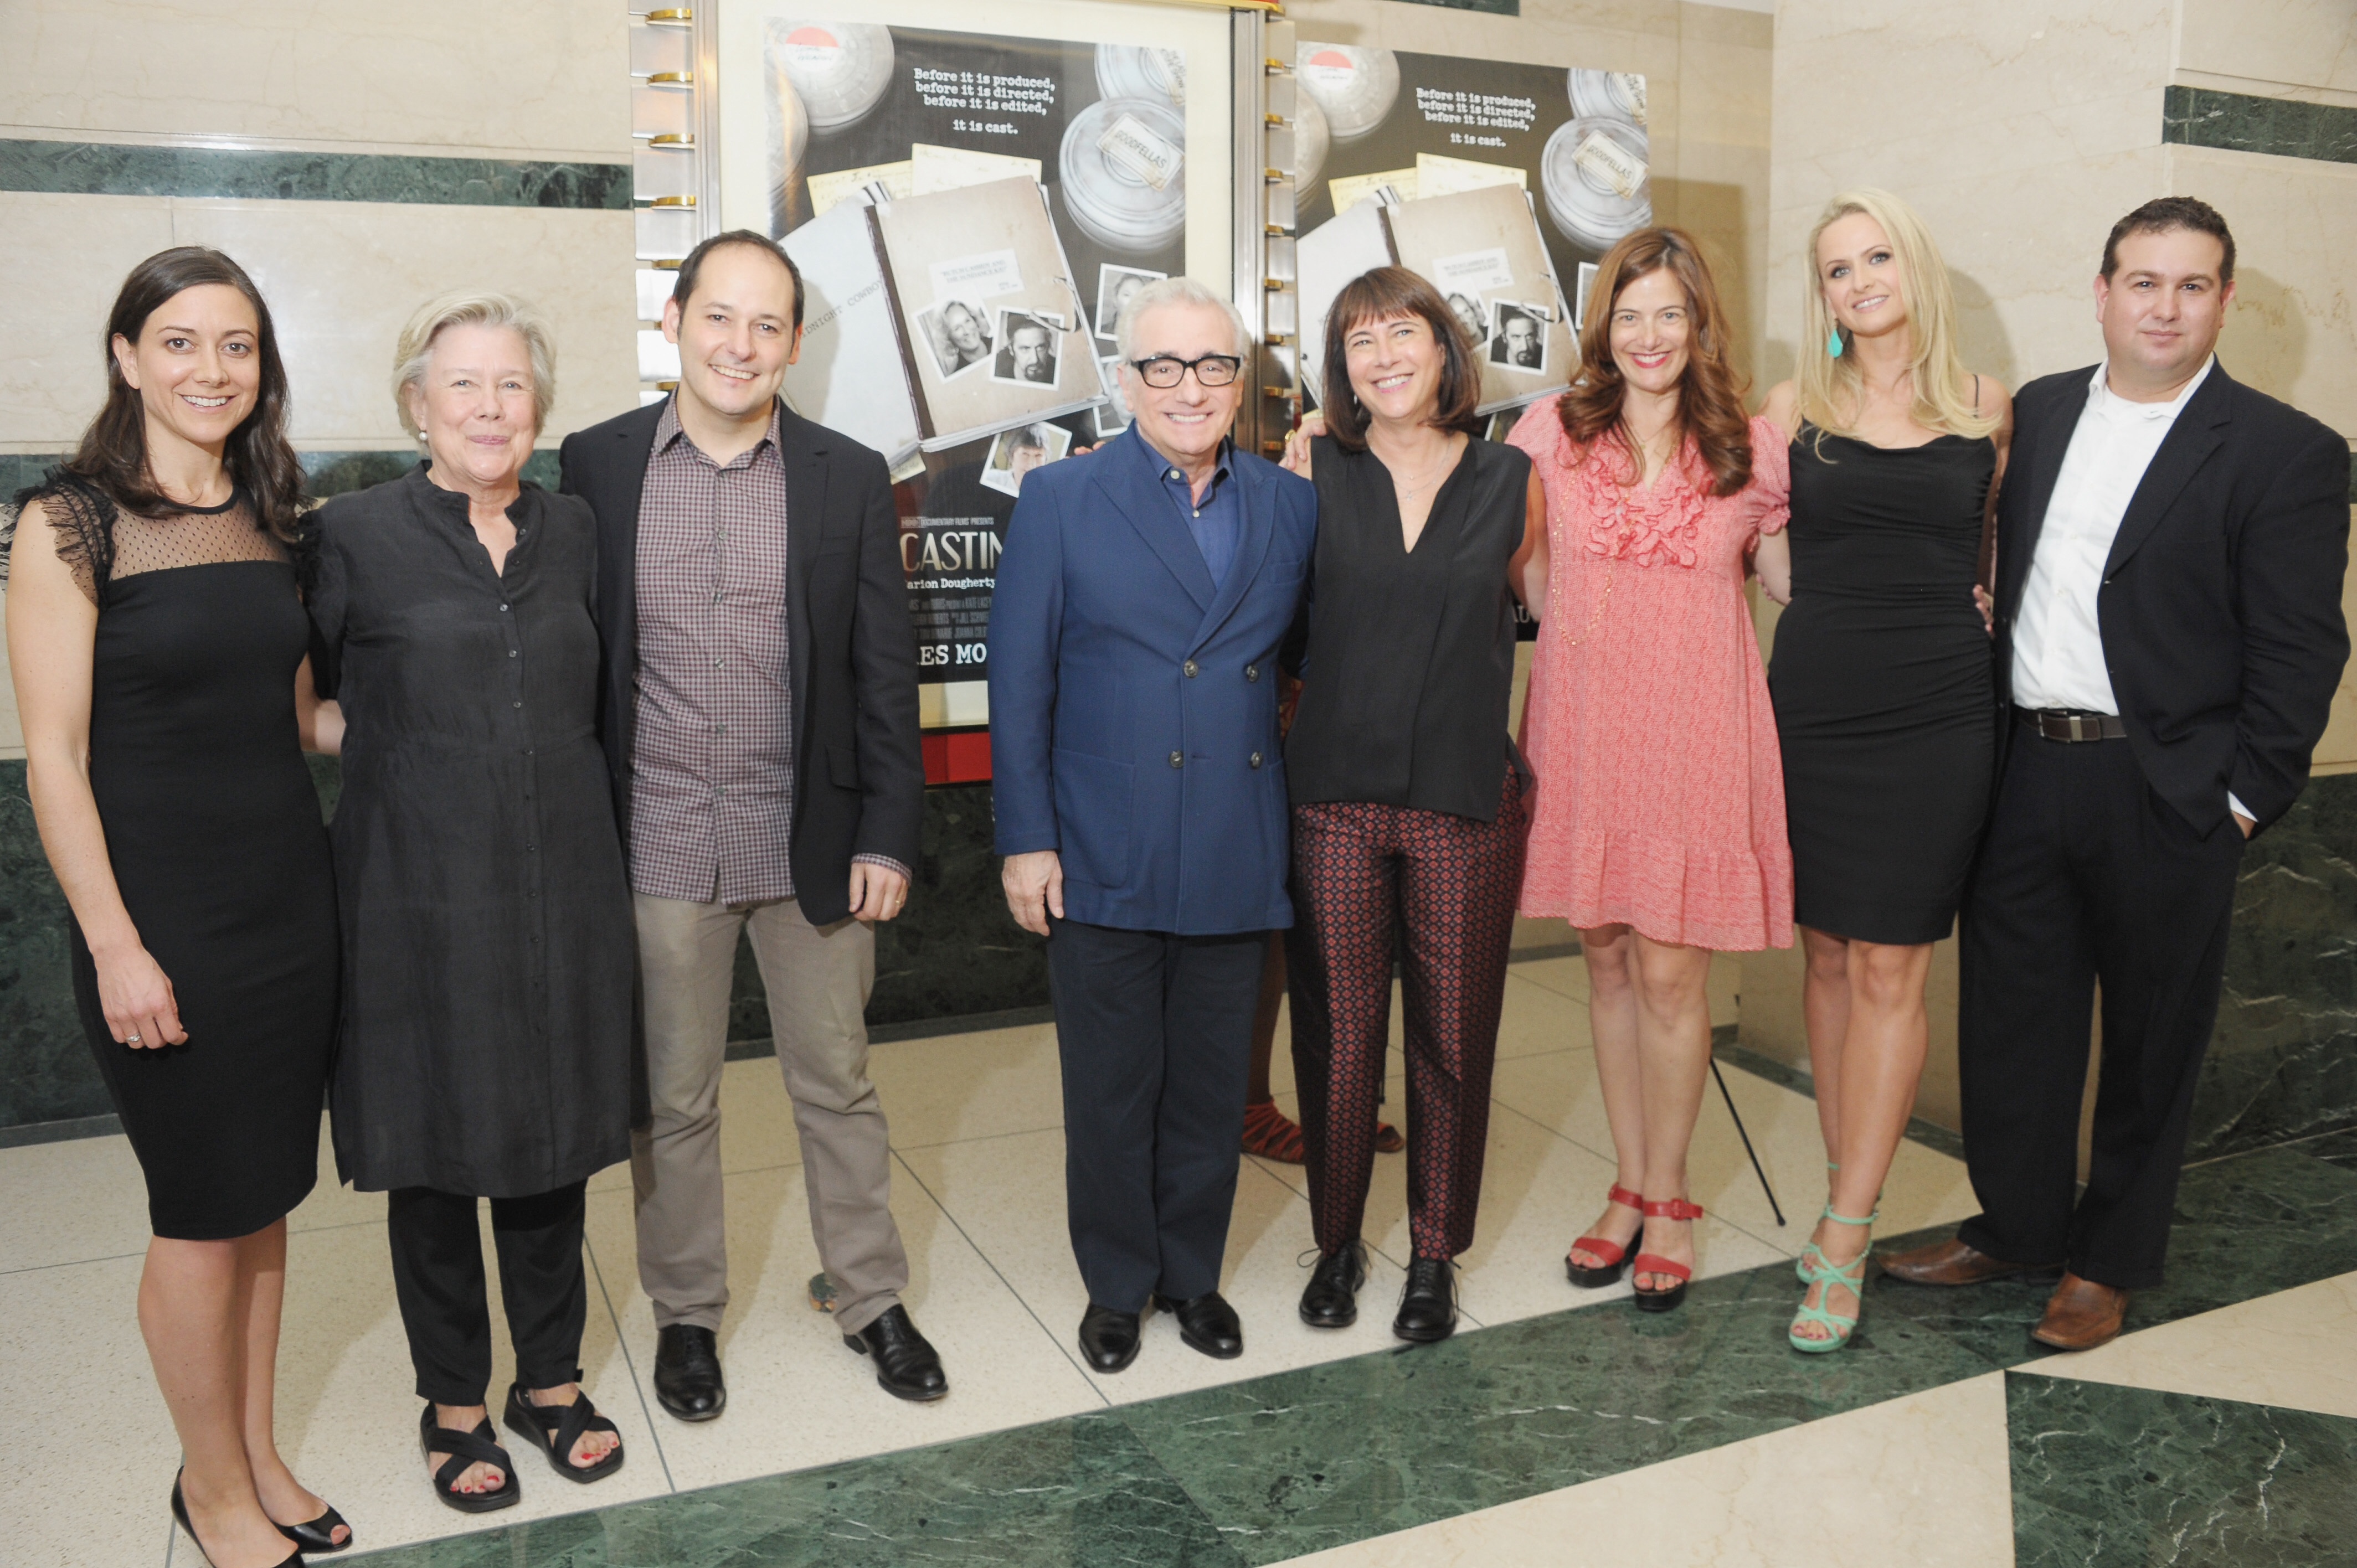 With Jill Schweitzer, Juliet Taylor, Martin Scorsese, Ellen Lewis, Joanna Colbert, Kate Lacey and Ilan Arboleda at the HBO premiere of Casting By (2013)